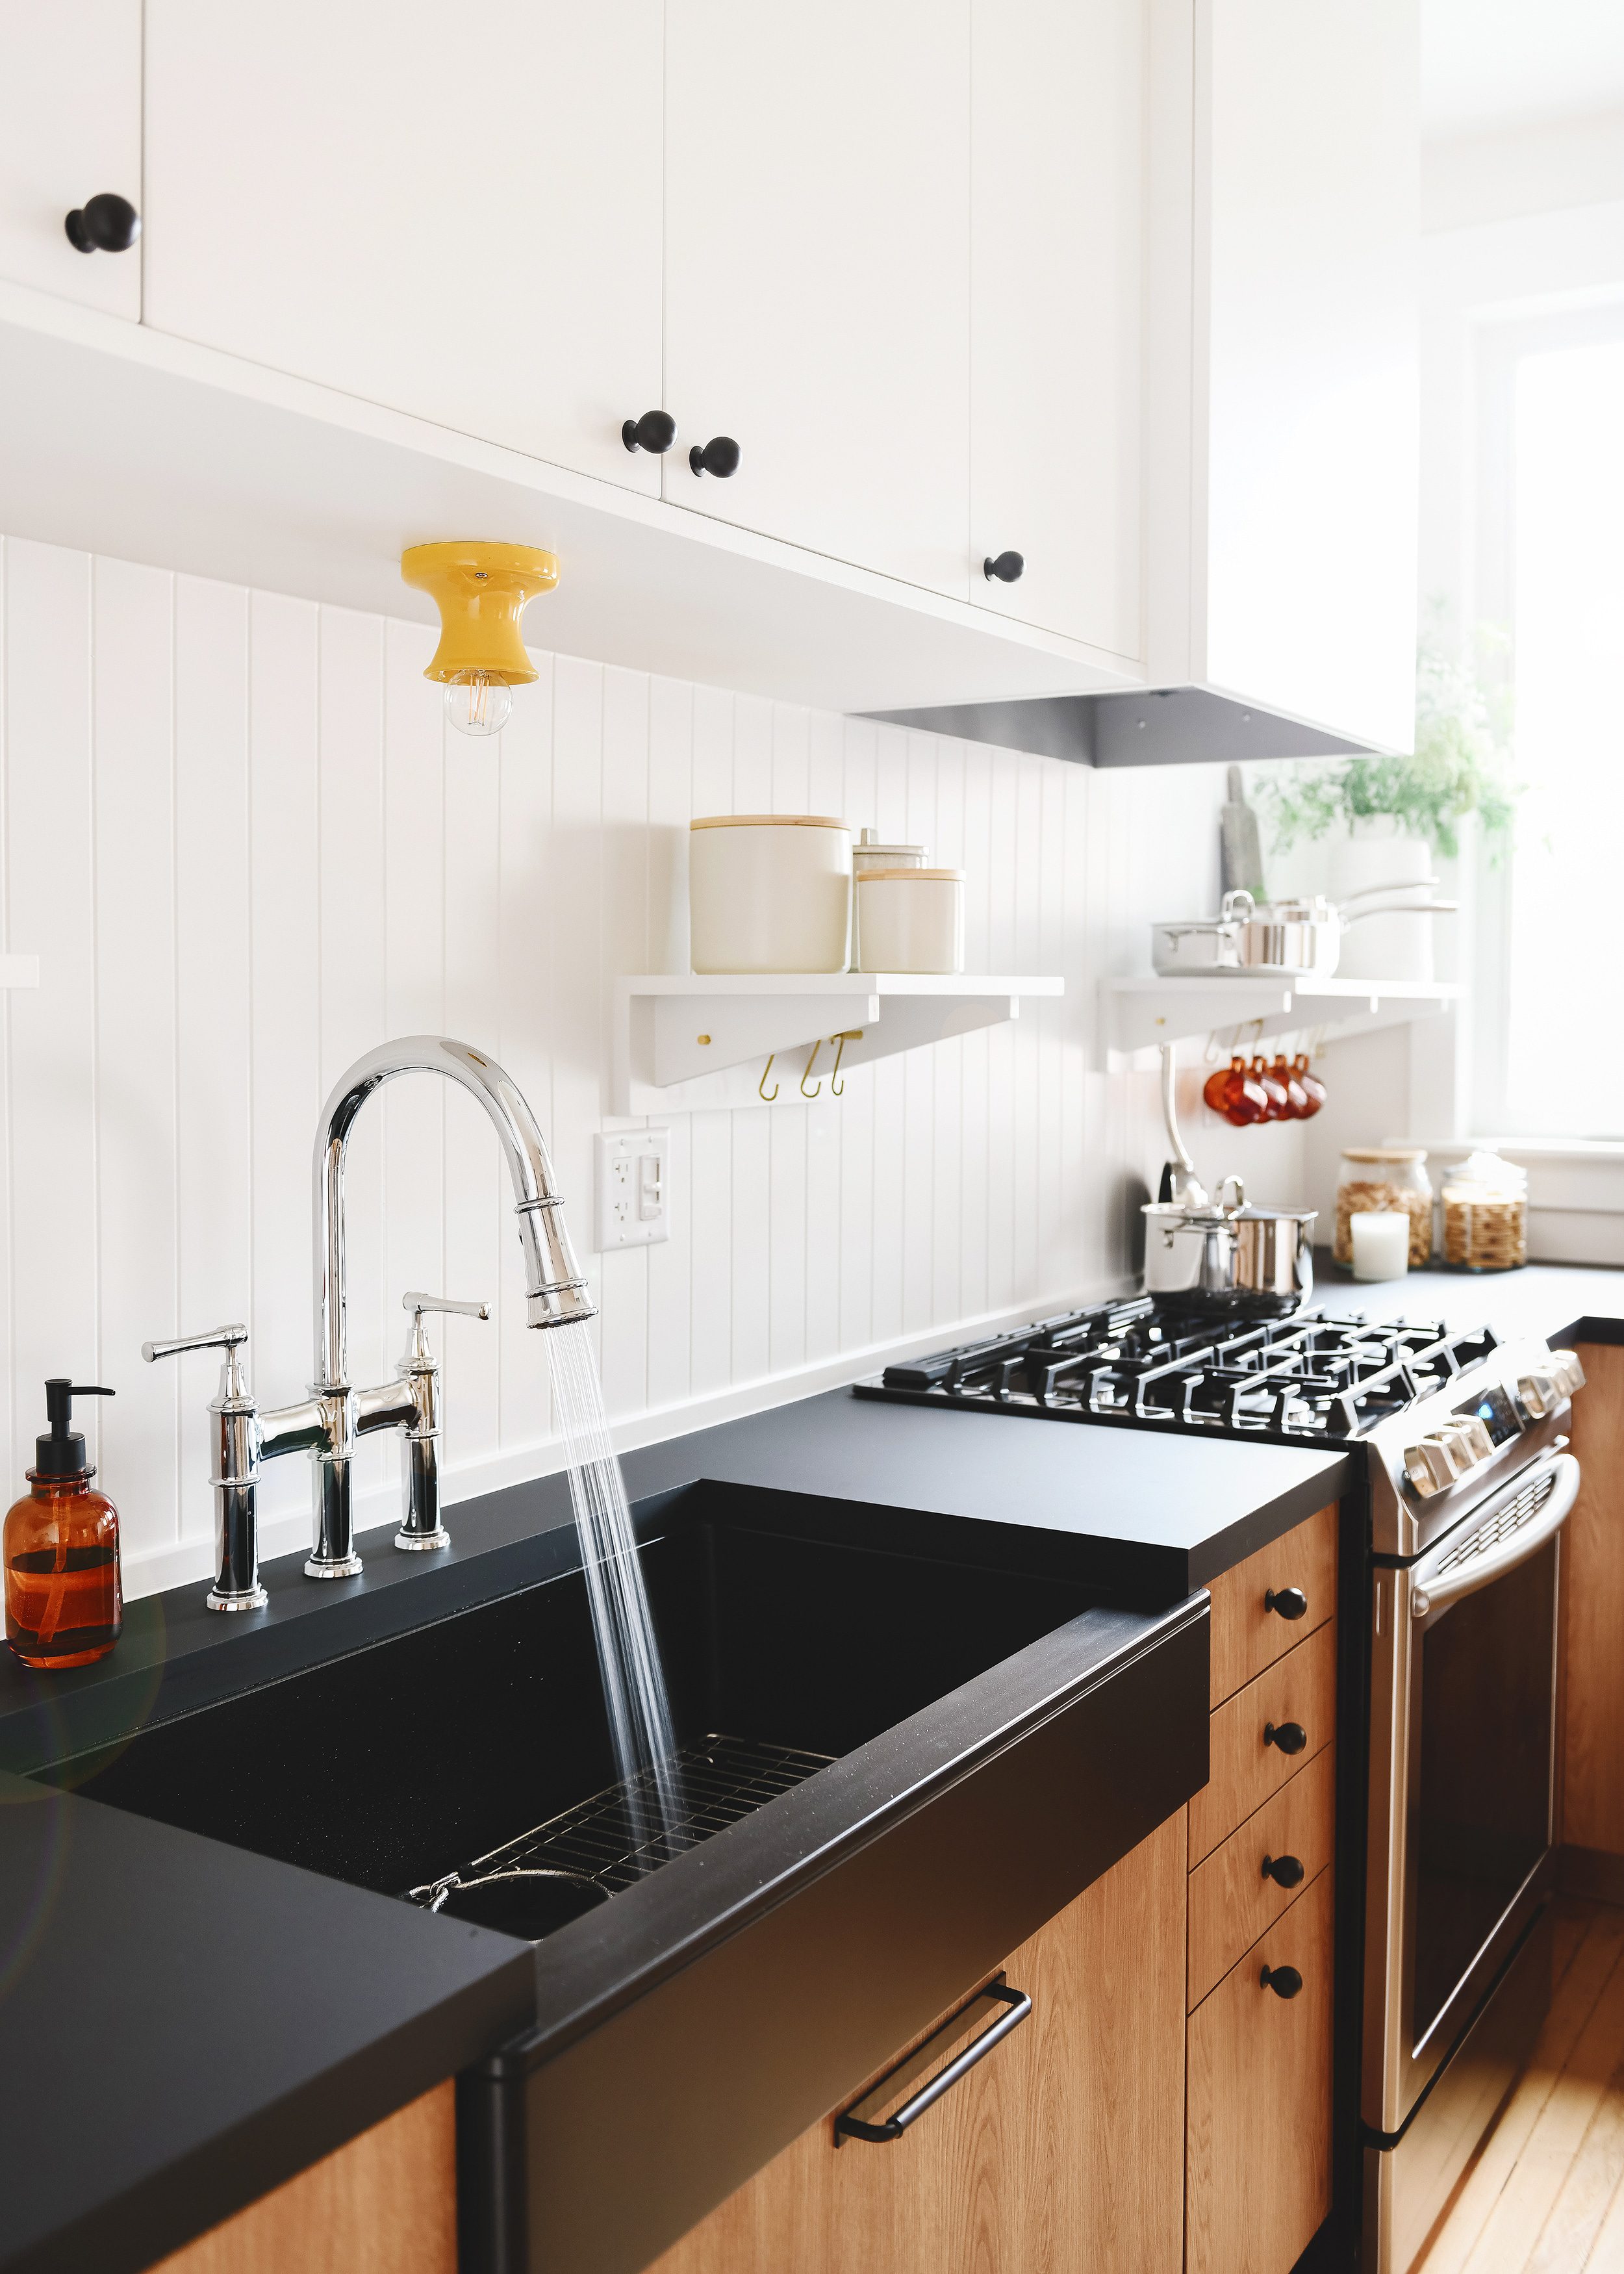 Elkay Explore bridge faucet with a Quartz Luxe apron front sink in a caviar finish, wood-toned cabinetry and black countertop | via Yellow Brick Home